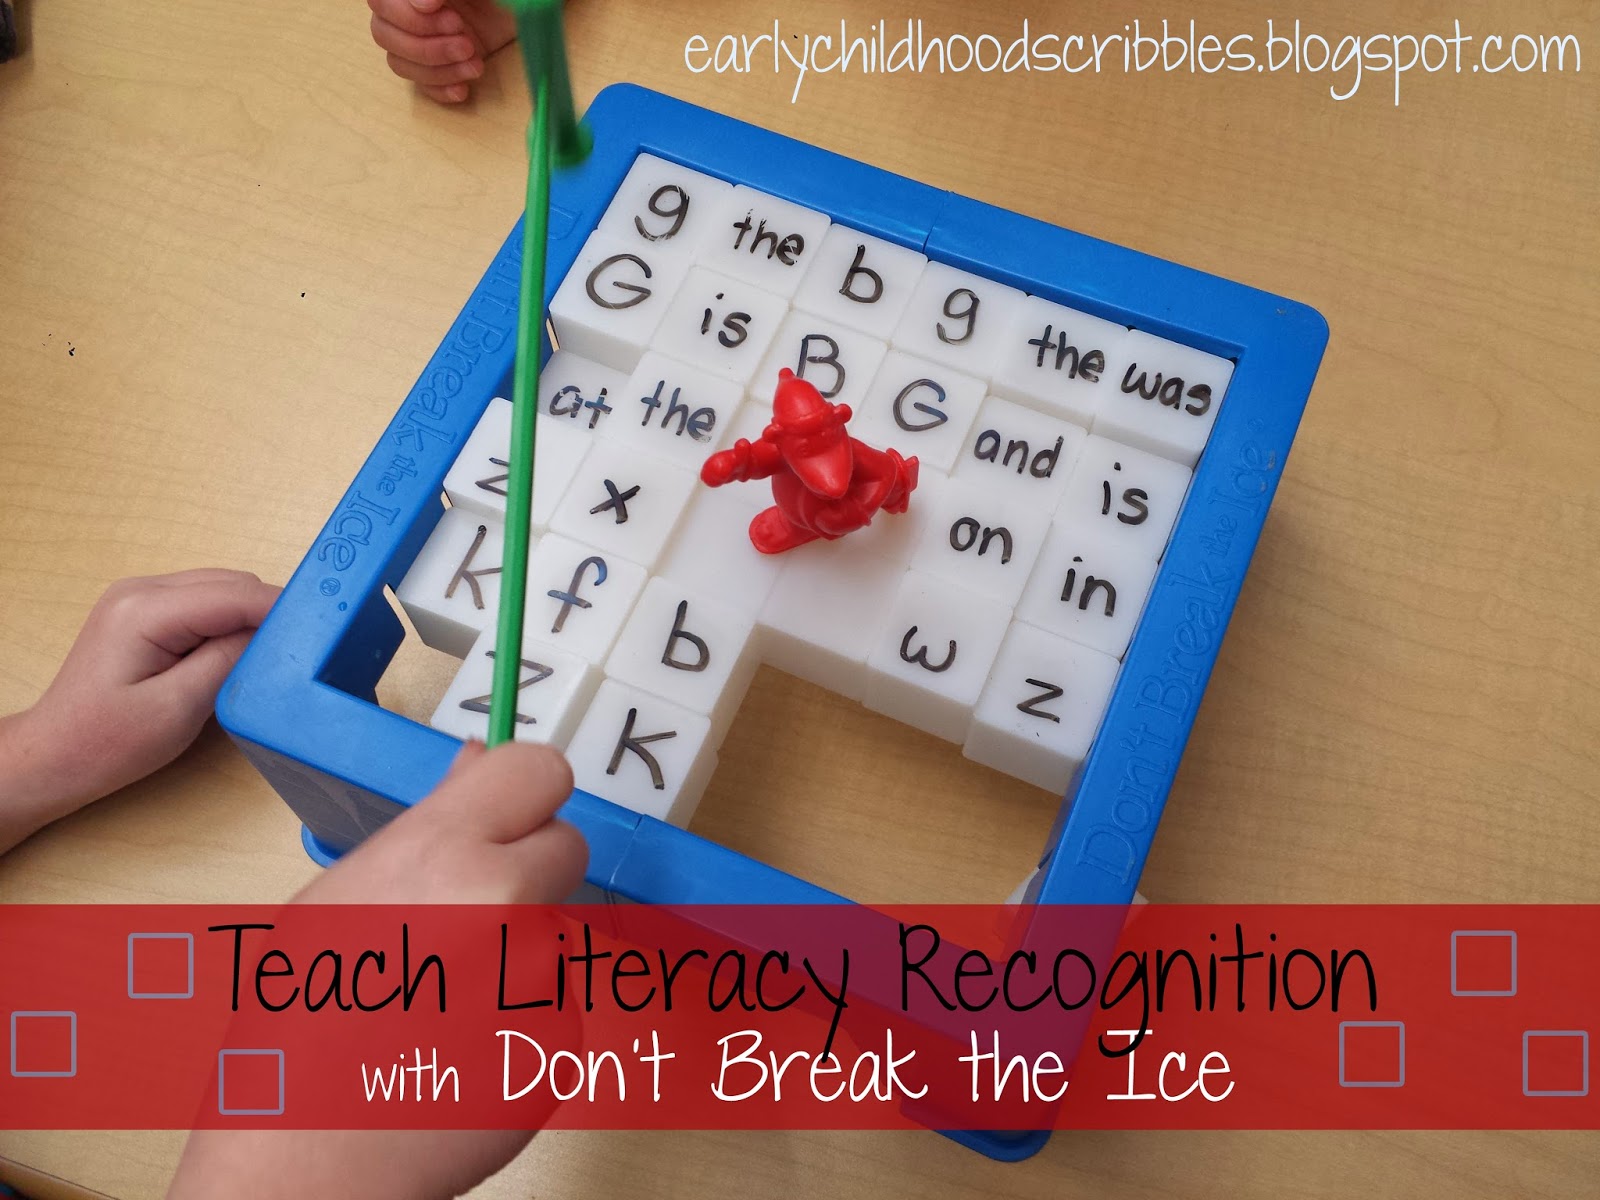 Early Childhood Scribbles: Don't Break the Ice